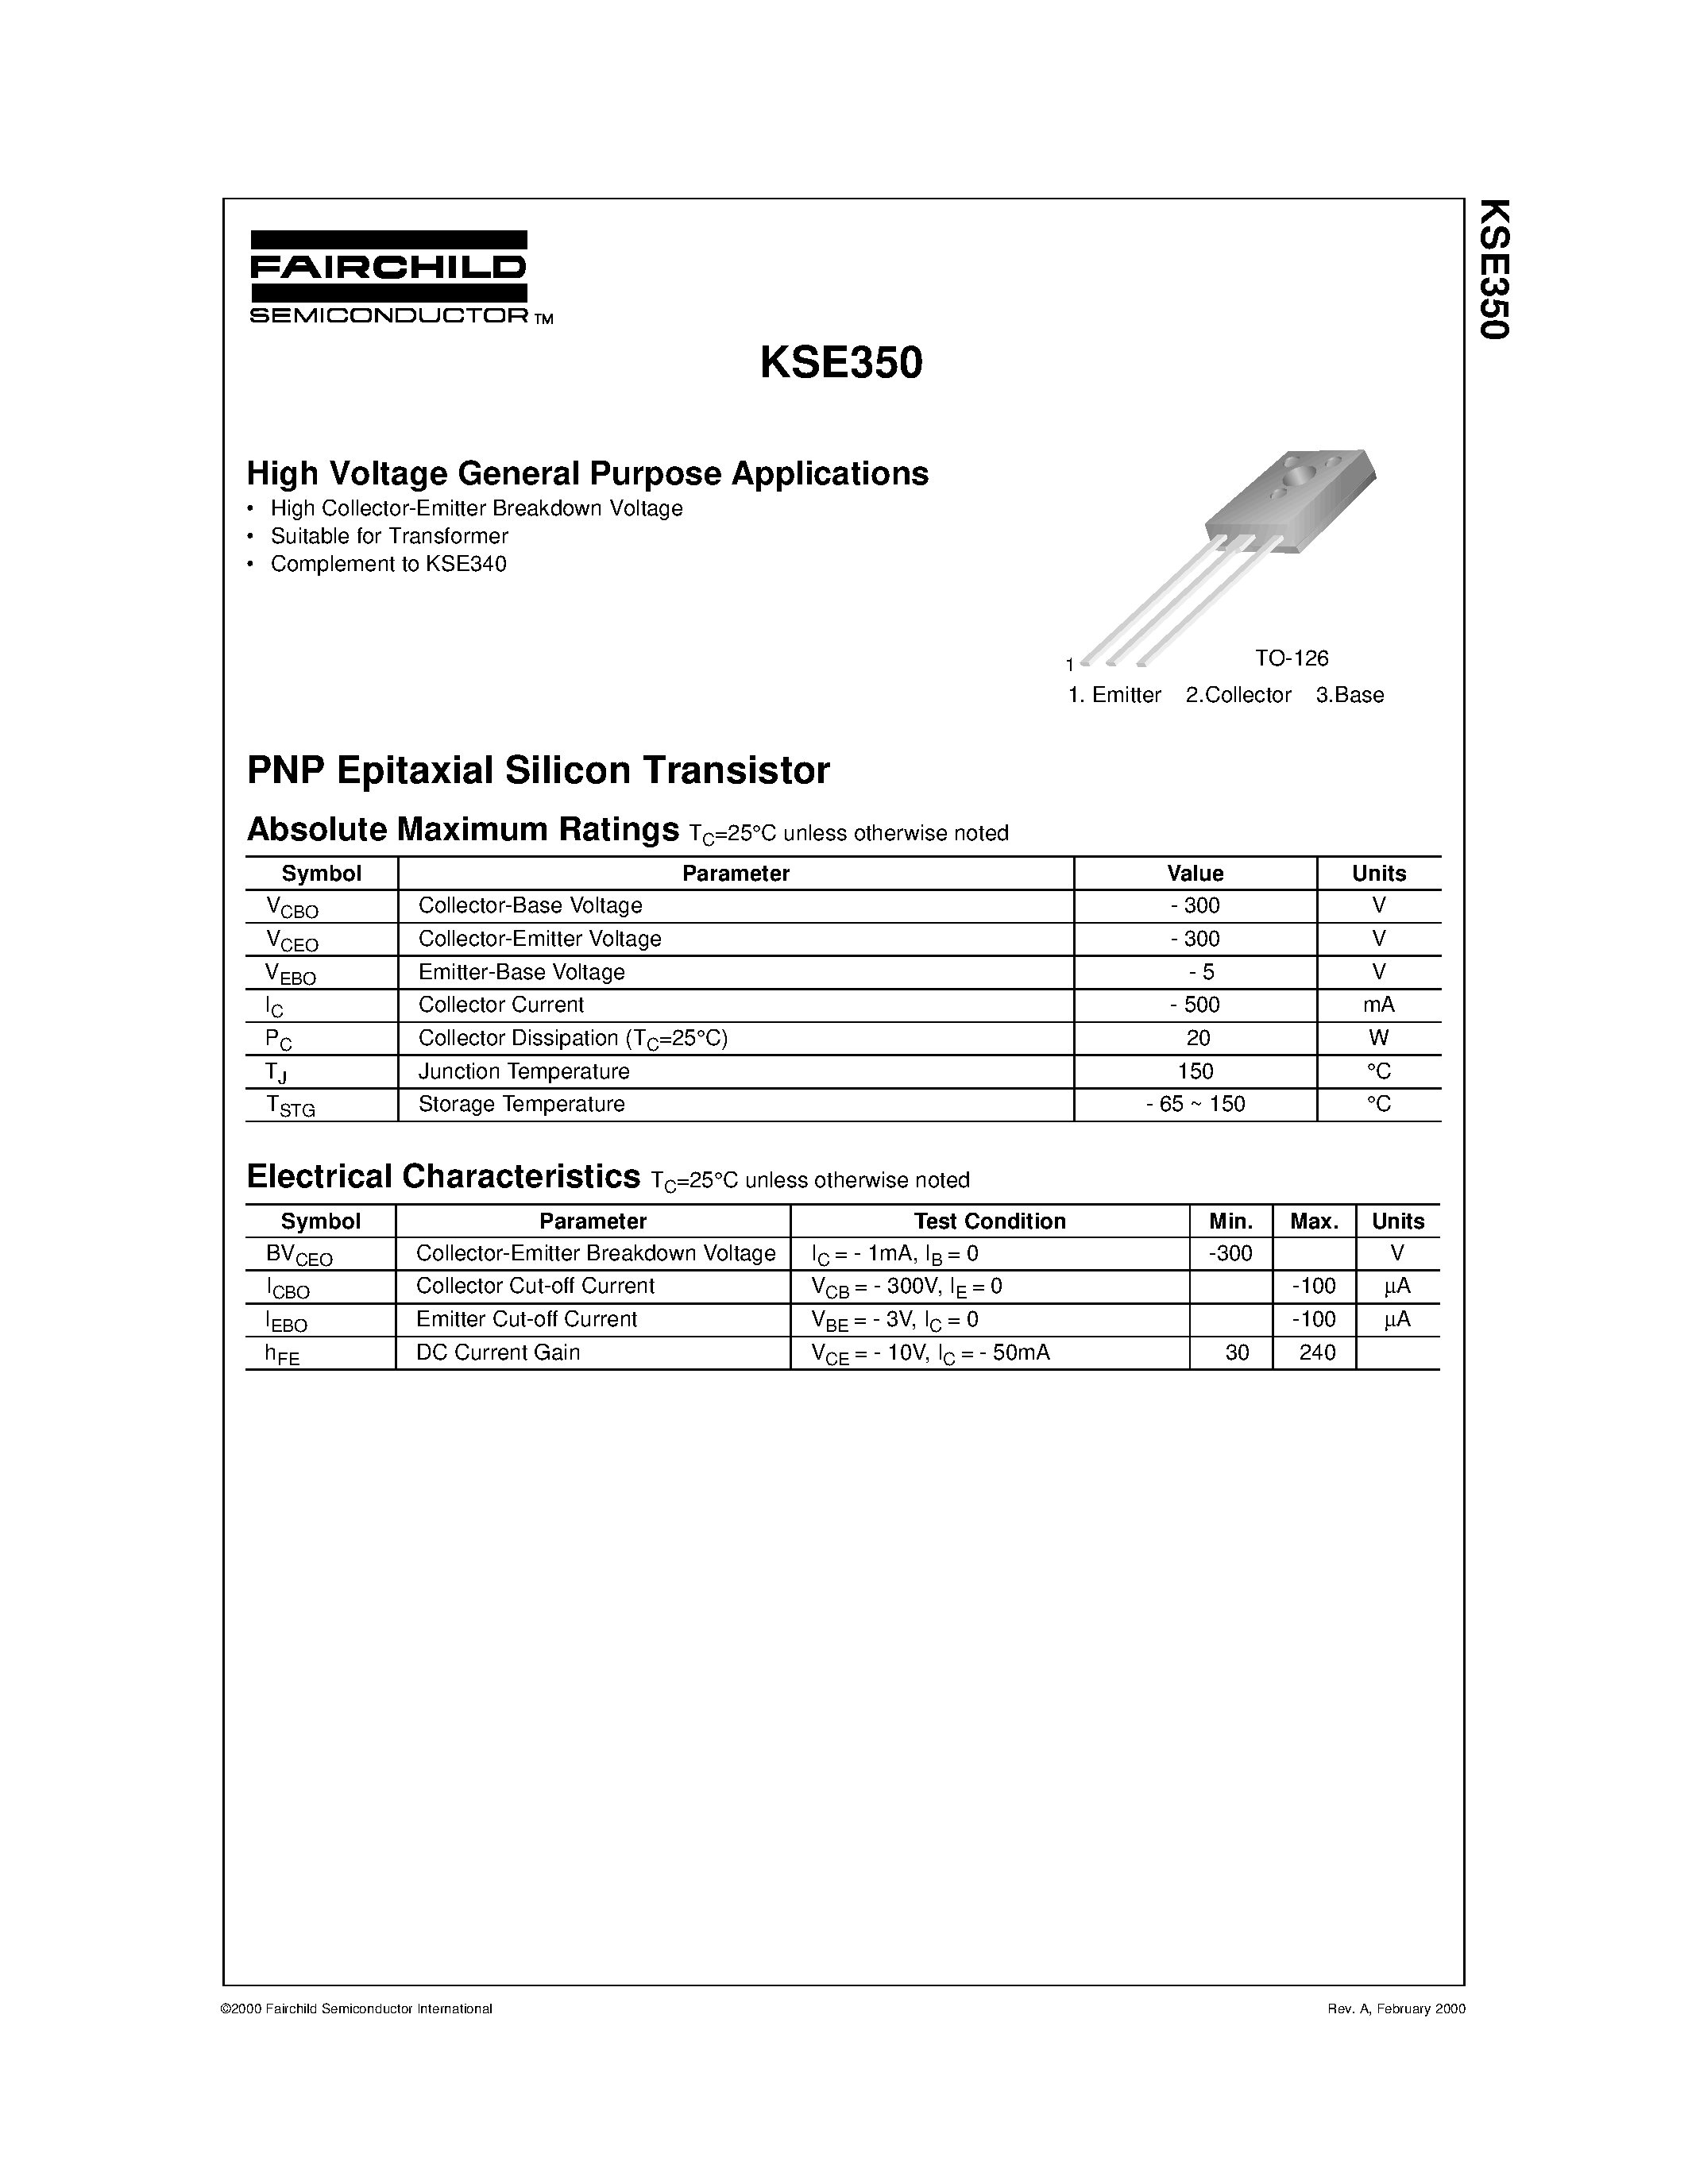 Datasheet KSE350 - High Voltage General Purpose Applications page 1